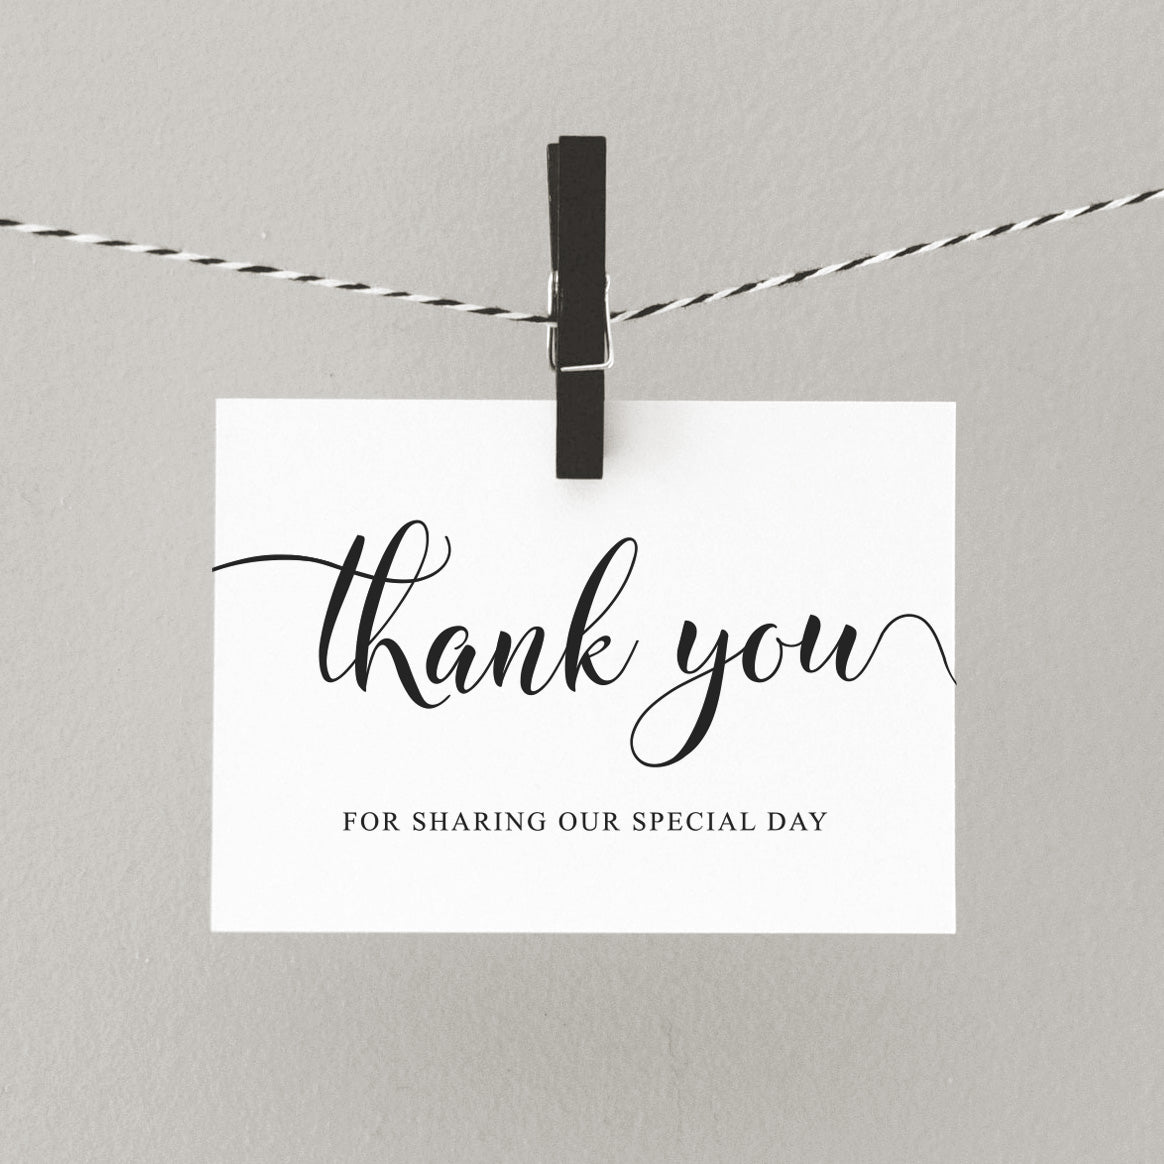 Printable wedding thank you sign from the bride & groom